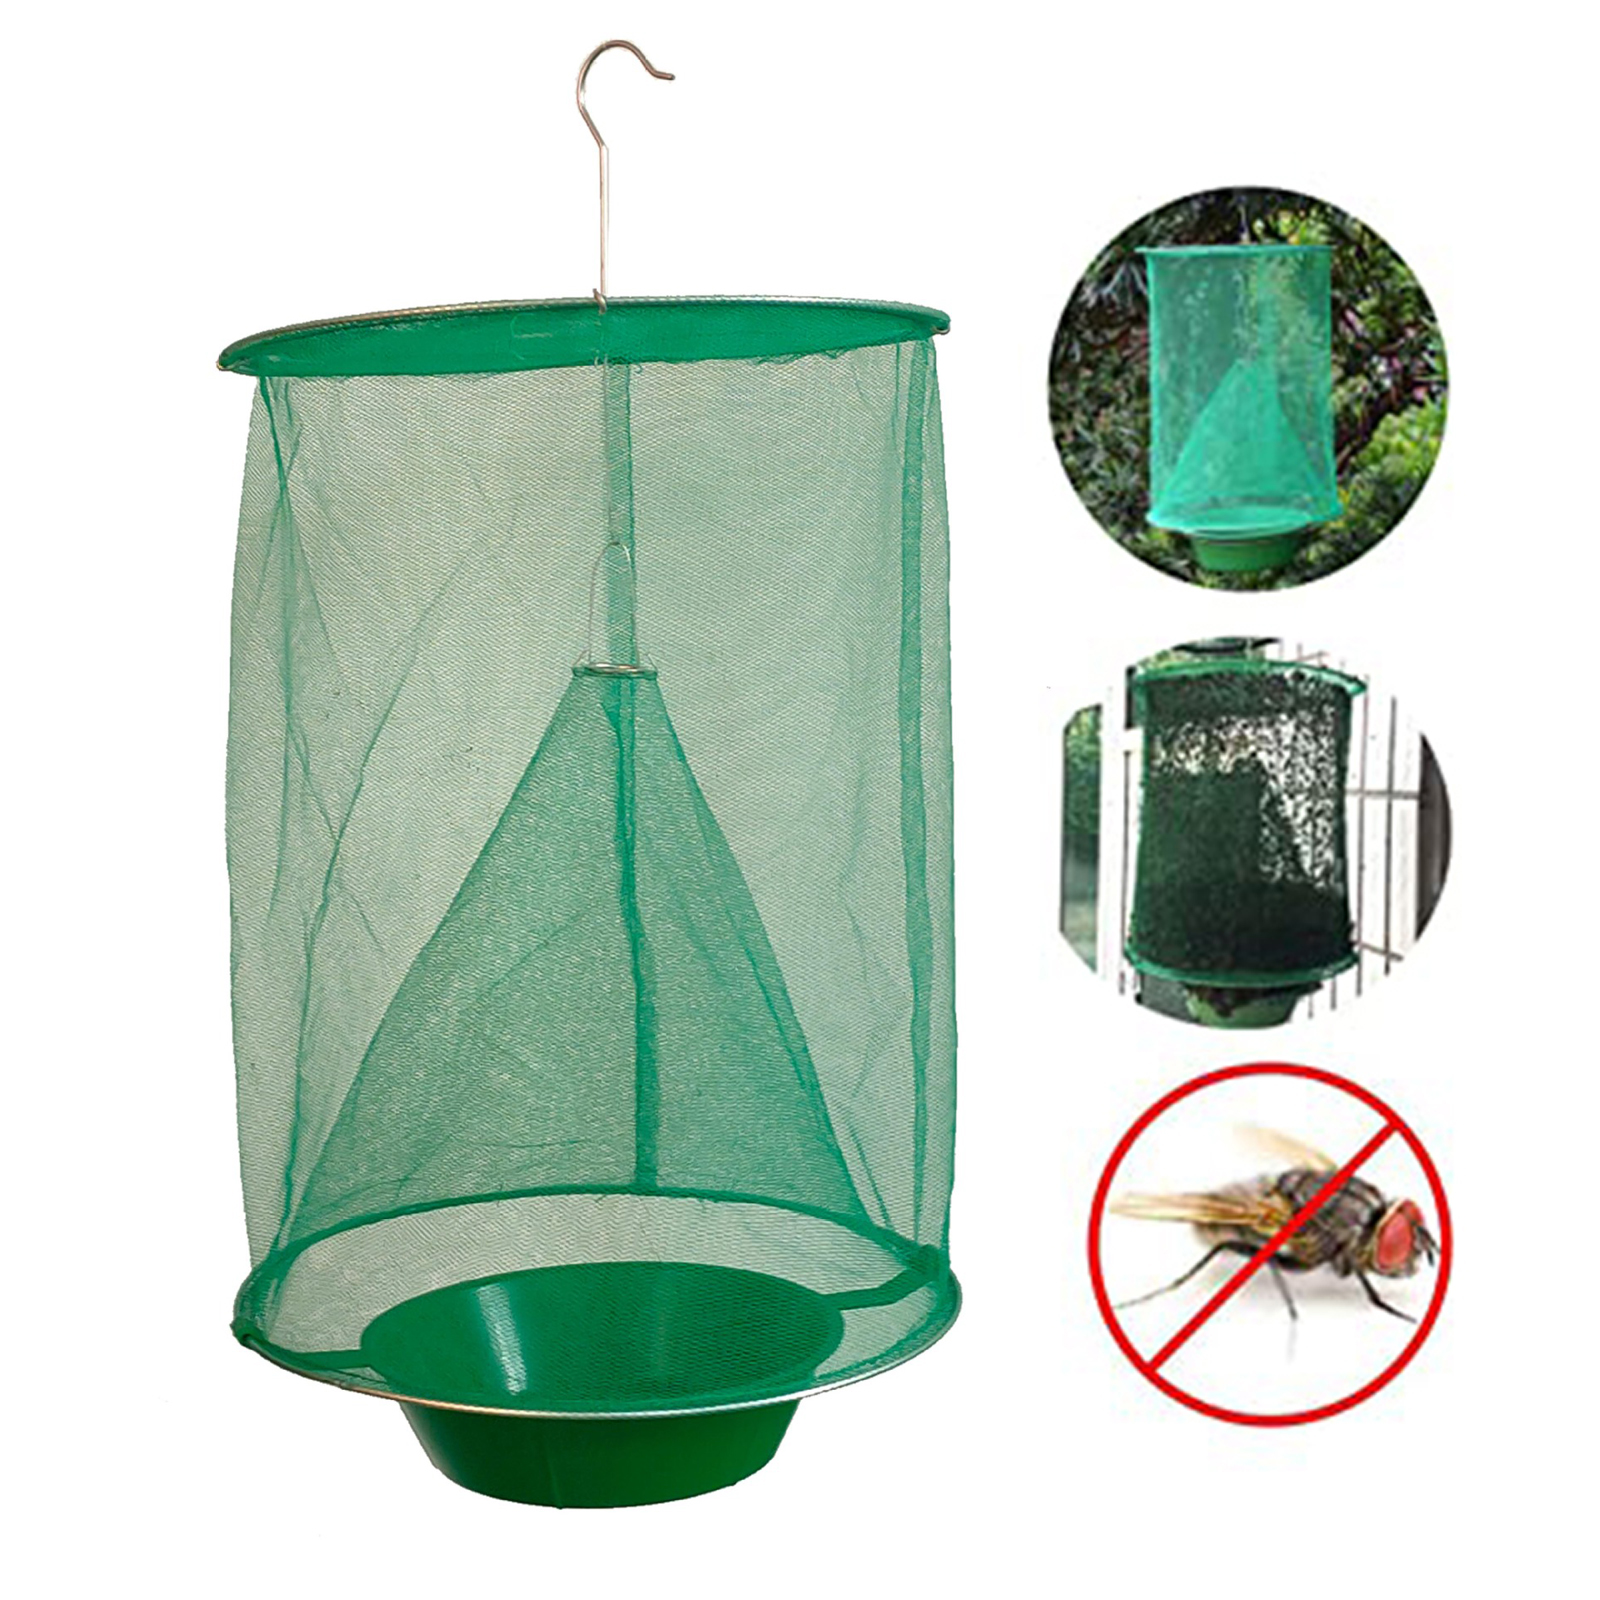 Hanging Fly Bag Trap Fly Catcher - China Fly Catcher and Trampa